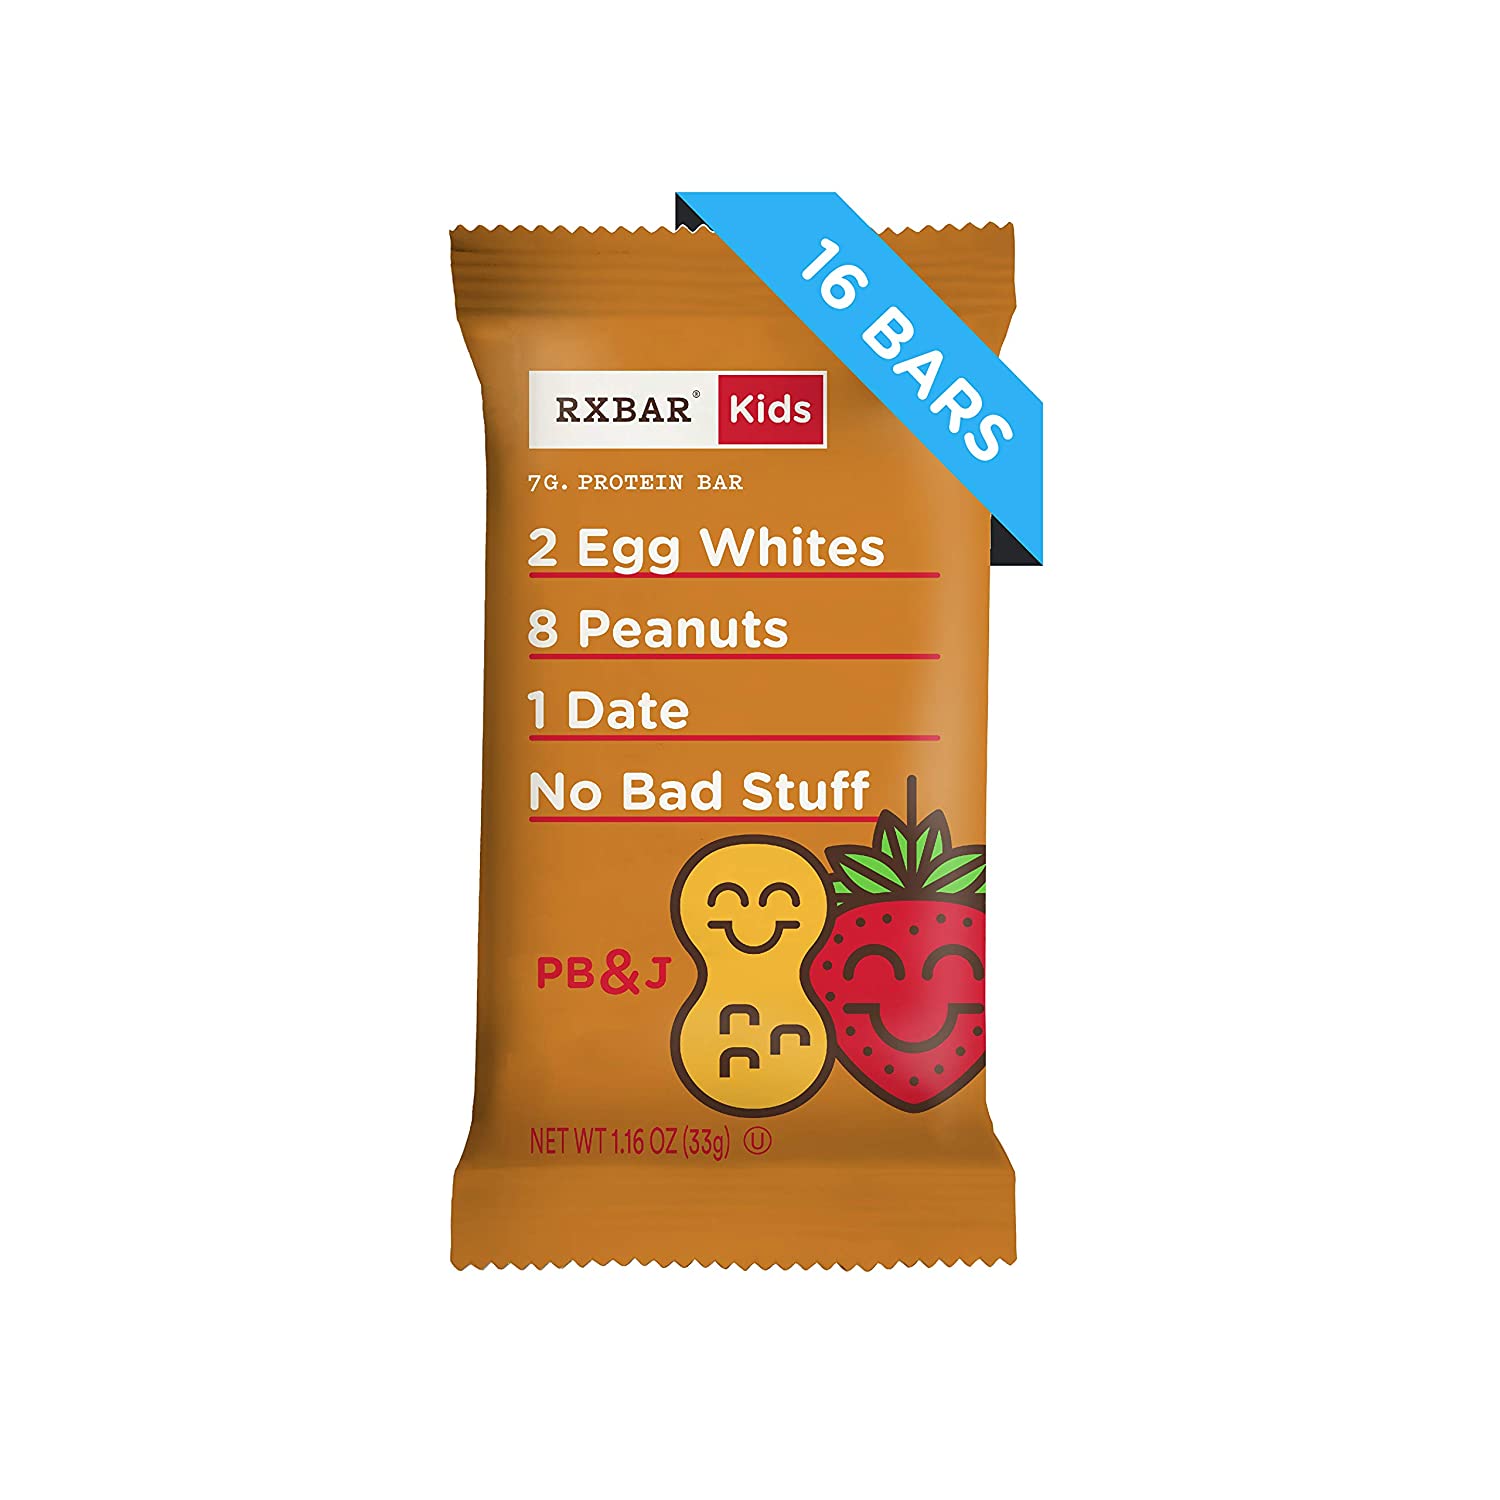 RXBAR Kids, Peanut Butter and Jelly, Protein Bar, 1.16 Ounce (Pack of 16) Kids Protein Snack, Breakfast Bar, Lunchbox Snack